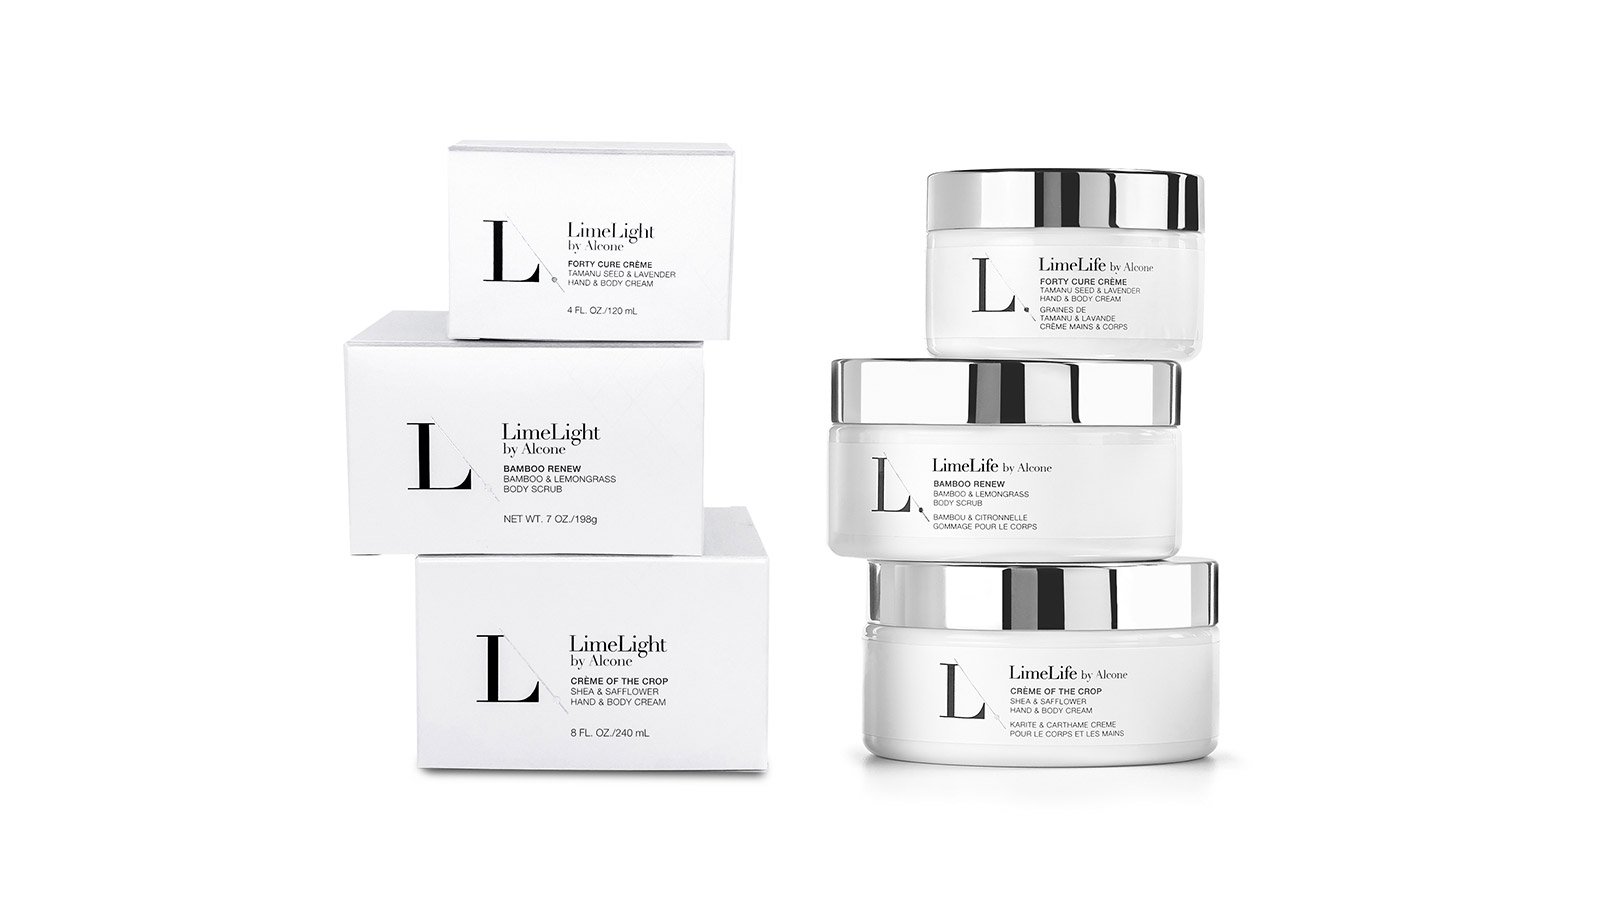 LimeLight beauty packaging